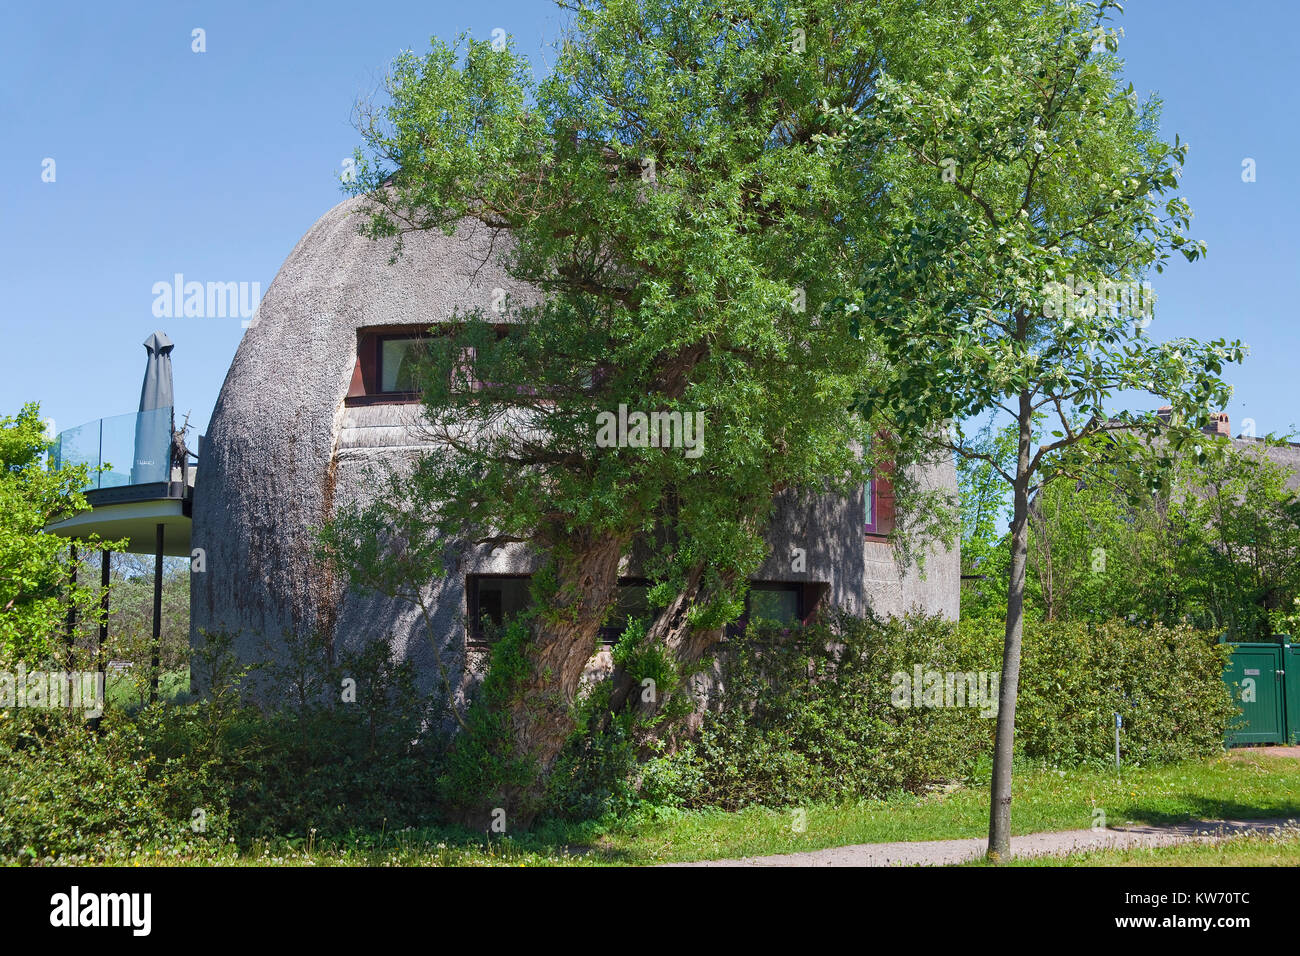 Modern design house, thatched-roof house at the village Ahrenshoop, Fishland, Mecklenburg-Western Pomerania, Baltic Sea, Germany, Europe Stock Photo